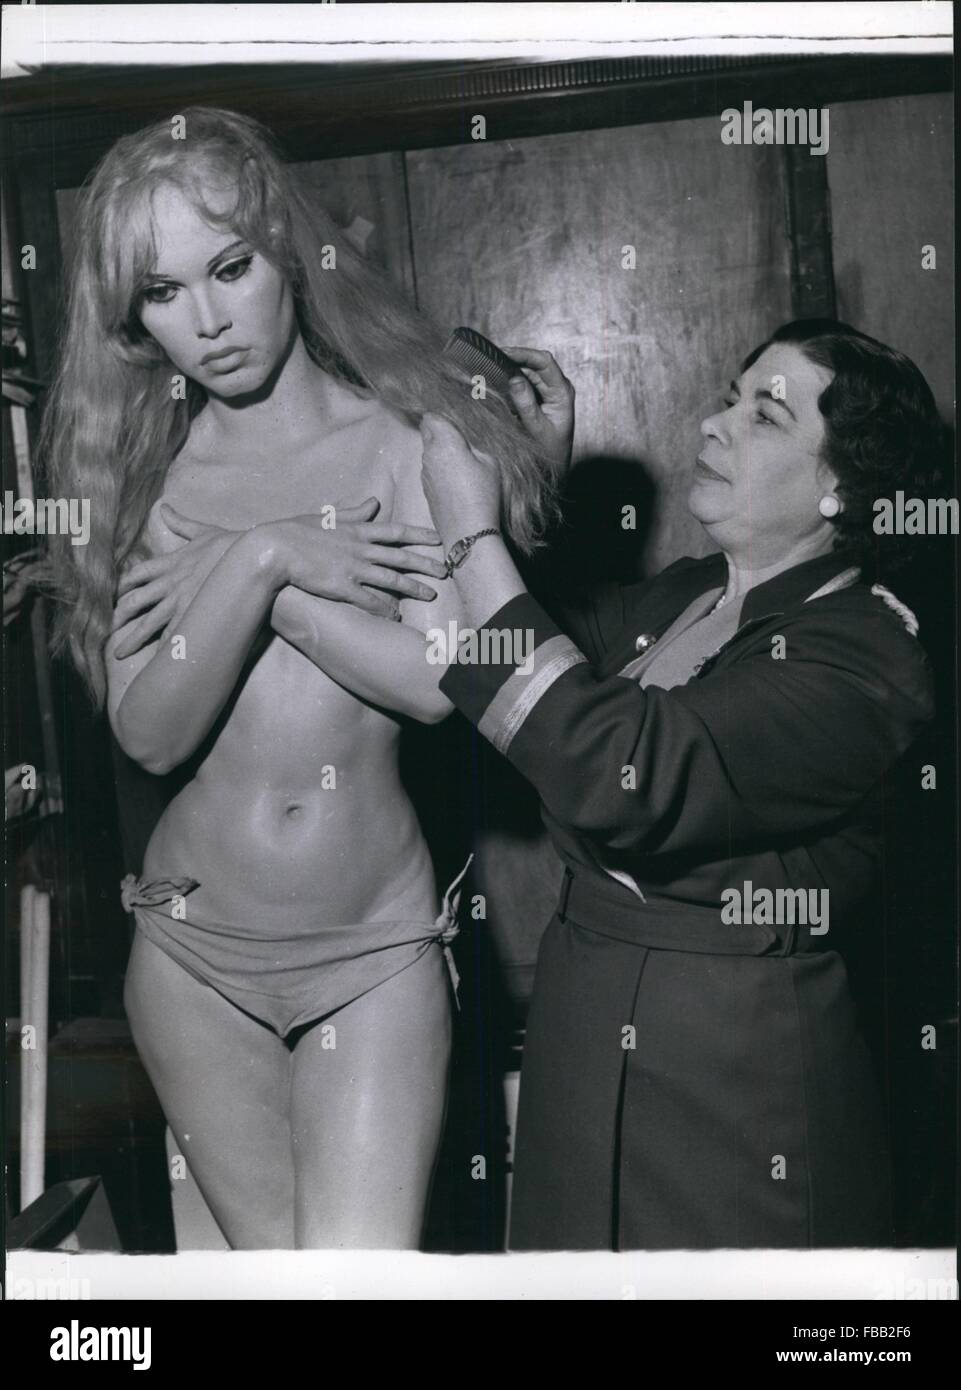 1969 - wax figure She;s quite sorry to see her go. Bardot gets a last dusting before she is collected for despatch northwards. © Keystone Pictures USA/ZUMAPRESS.com/Alamy Live News Stock Photo